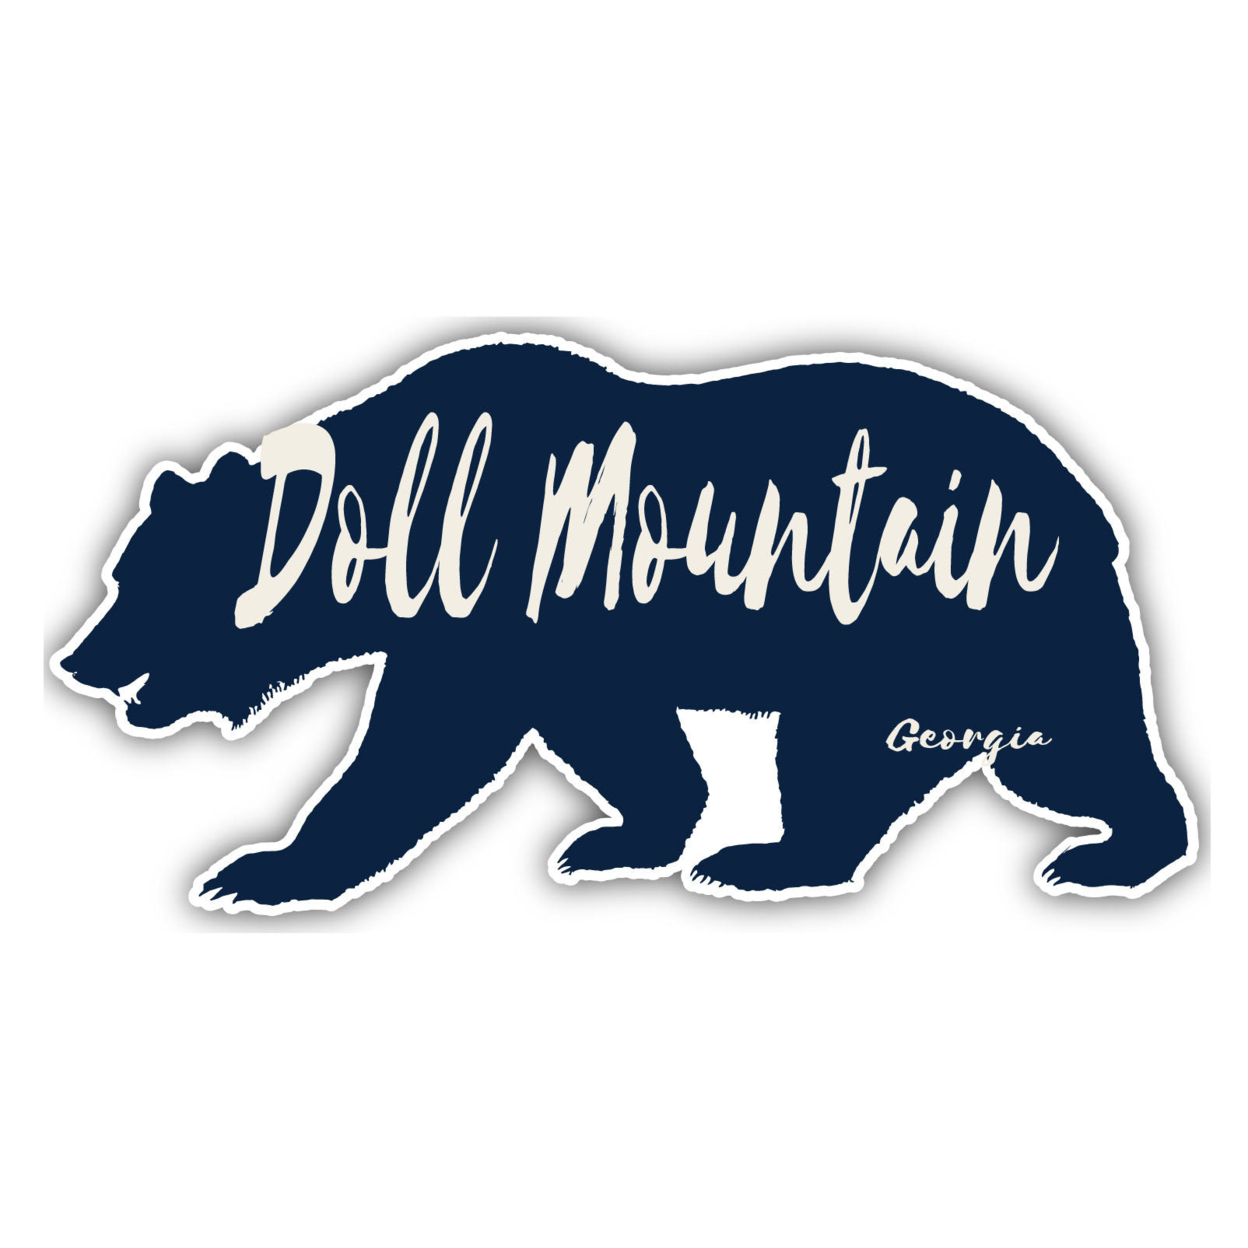 Doll Mountain Georgia Souvenir Decorative Stickers (Choose Theme And Size) - 4-Pack, 8-Inch, Great Outdoors